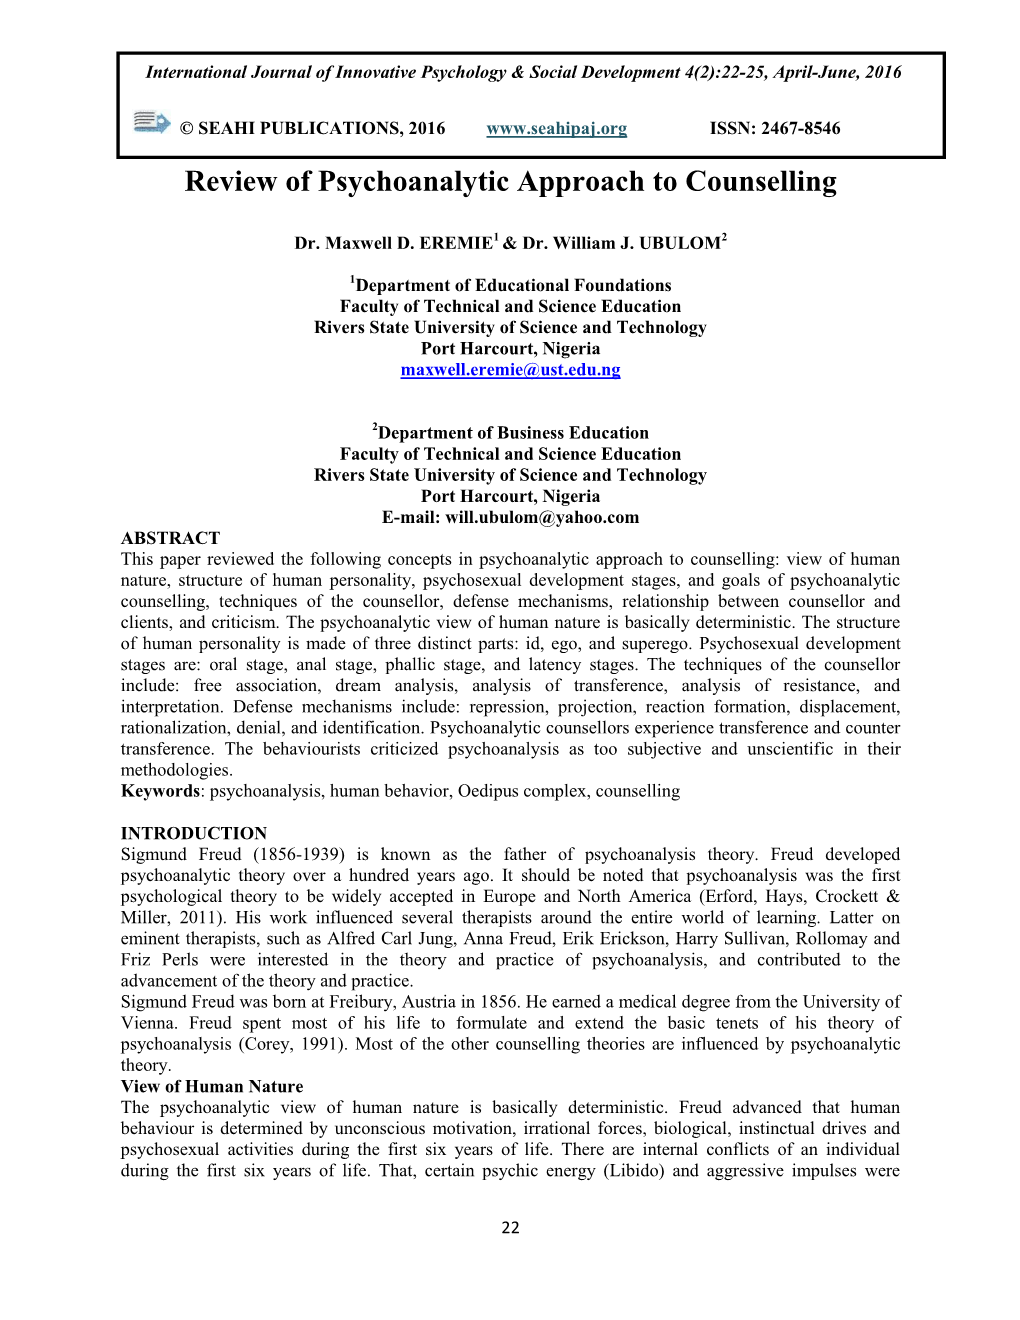 Review of Psychoanalytic Approach to Counselling